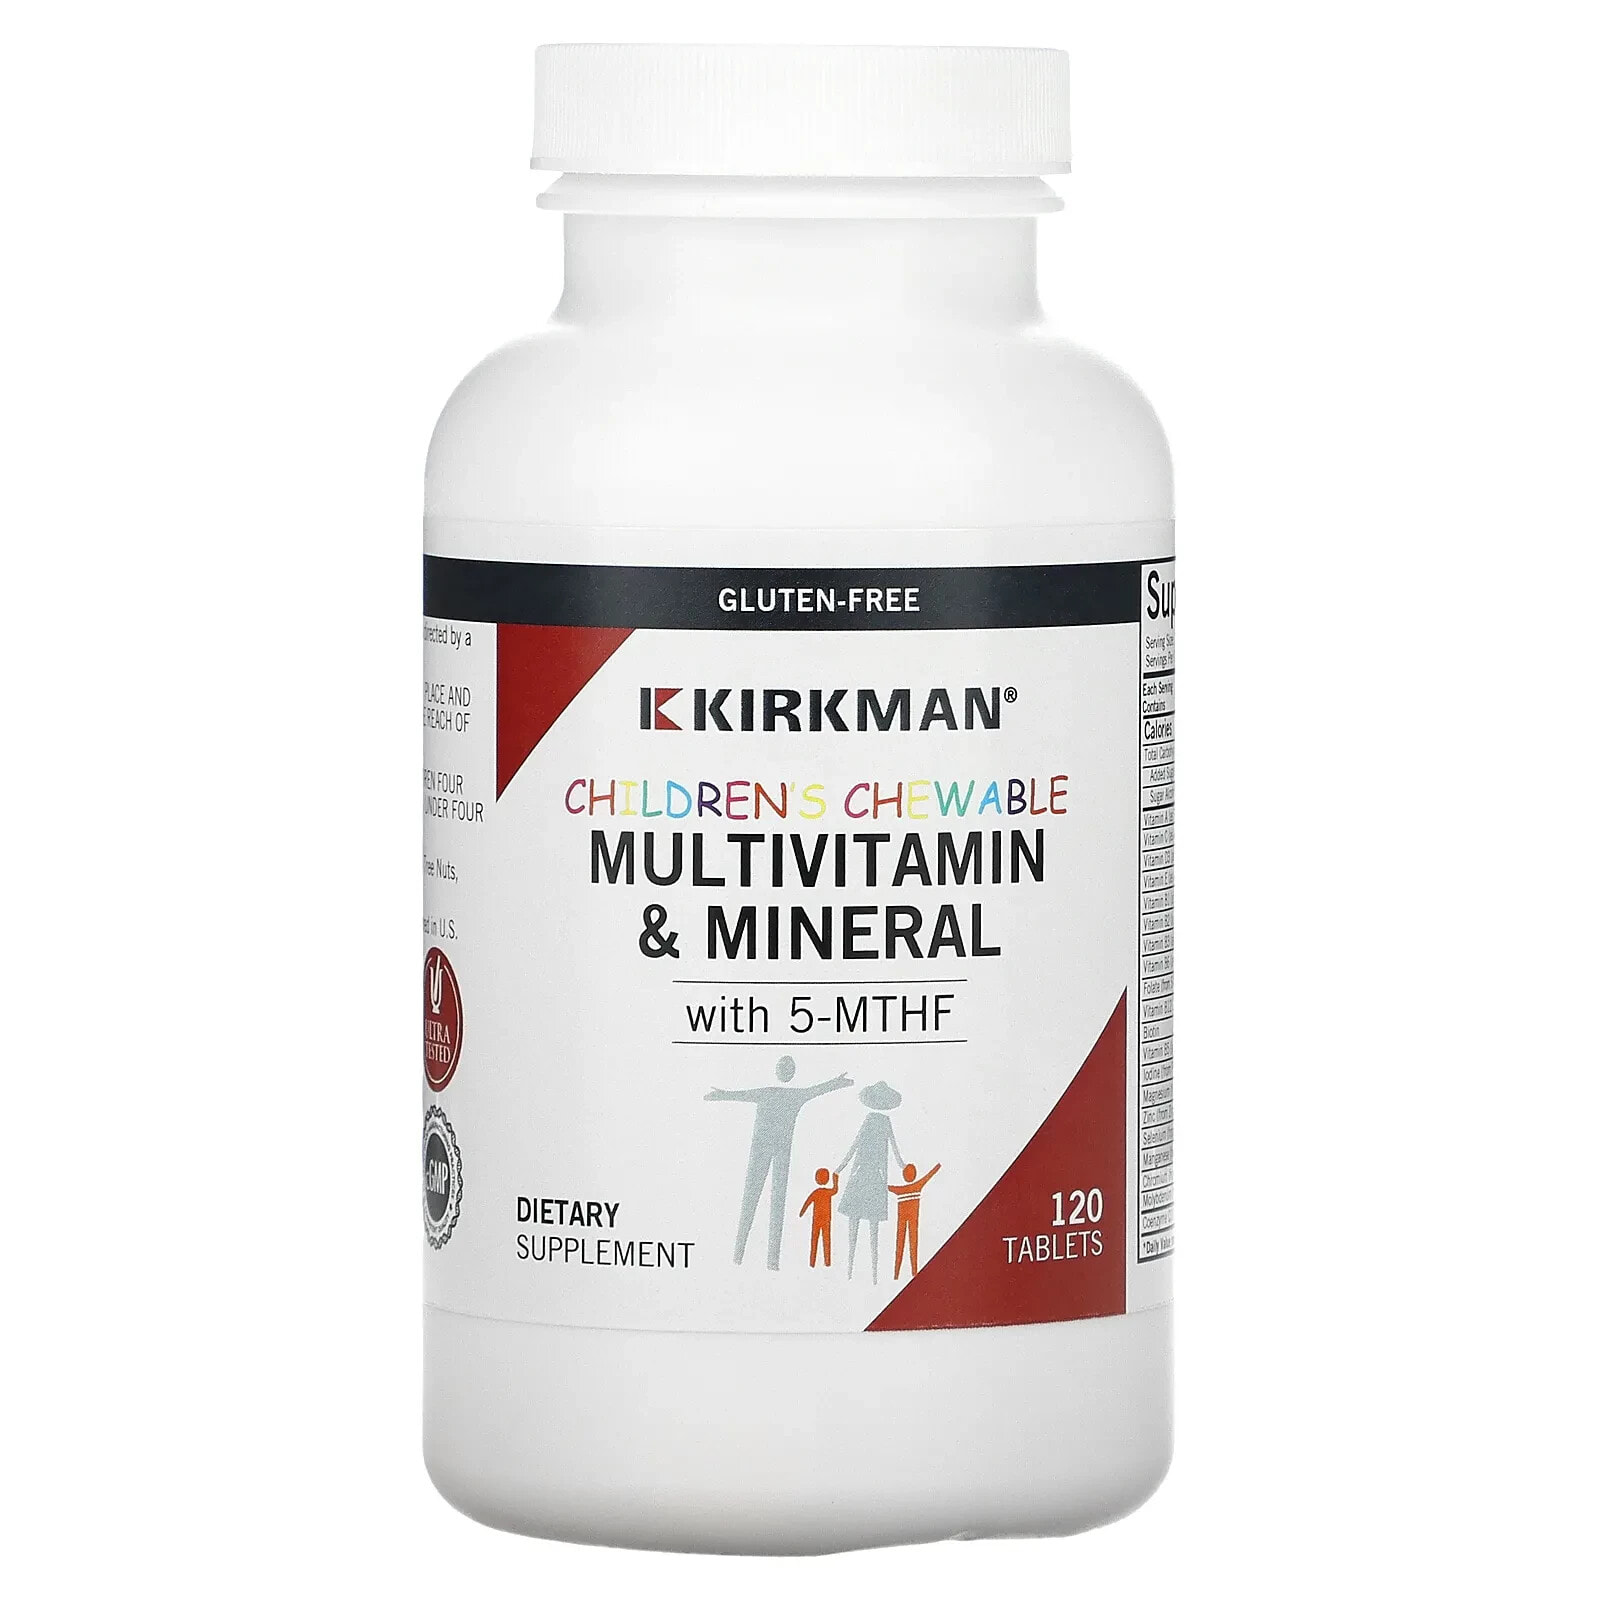 Children's Chewable Multivitamin & Mineral with 5-MTHF, 120 Tablets